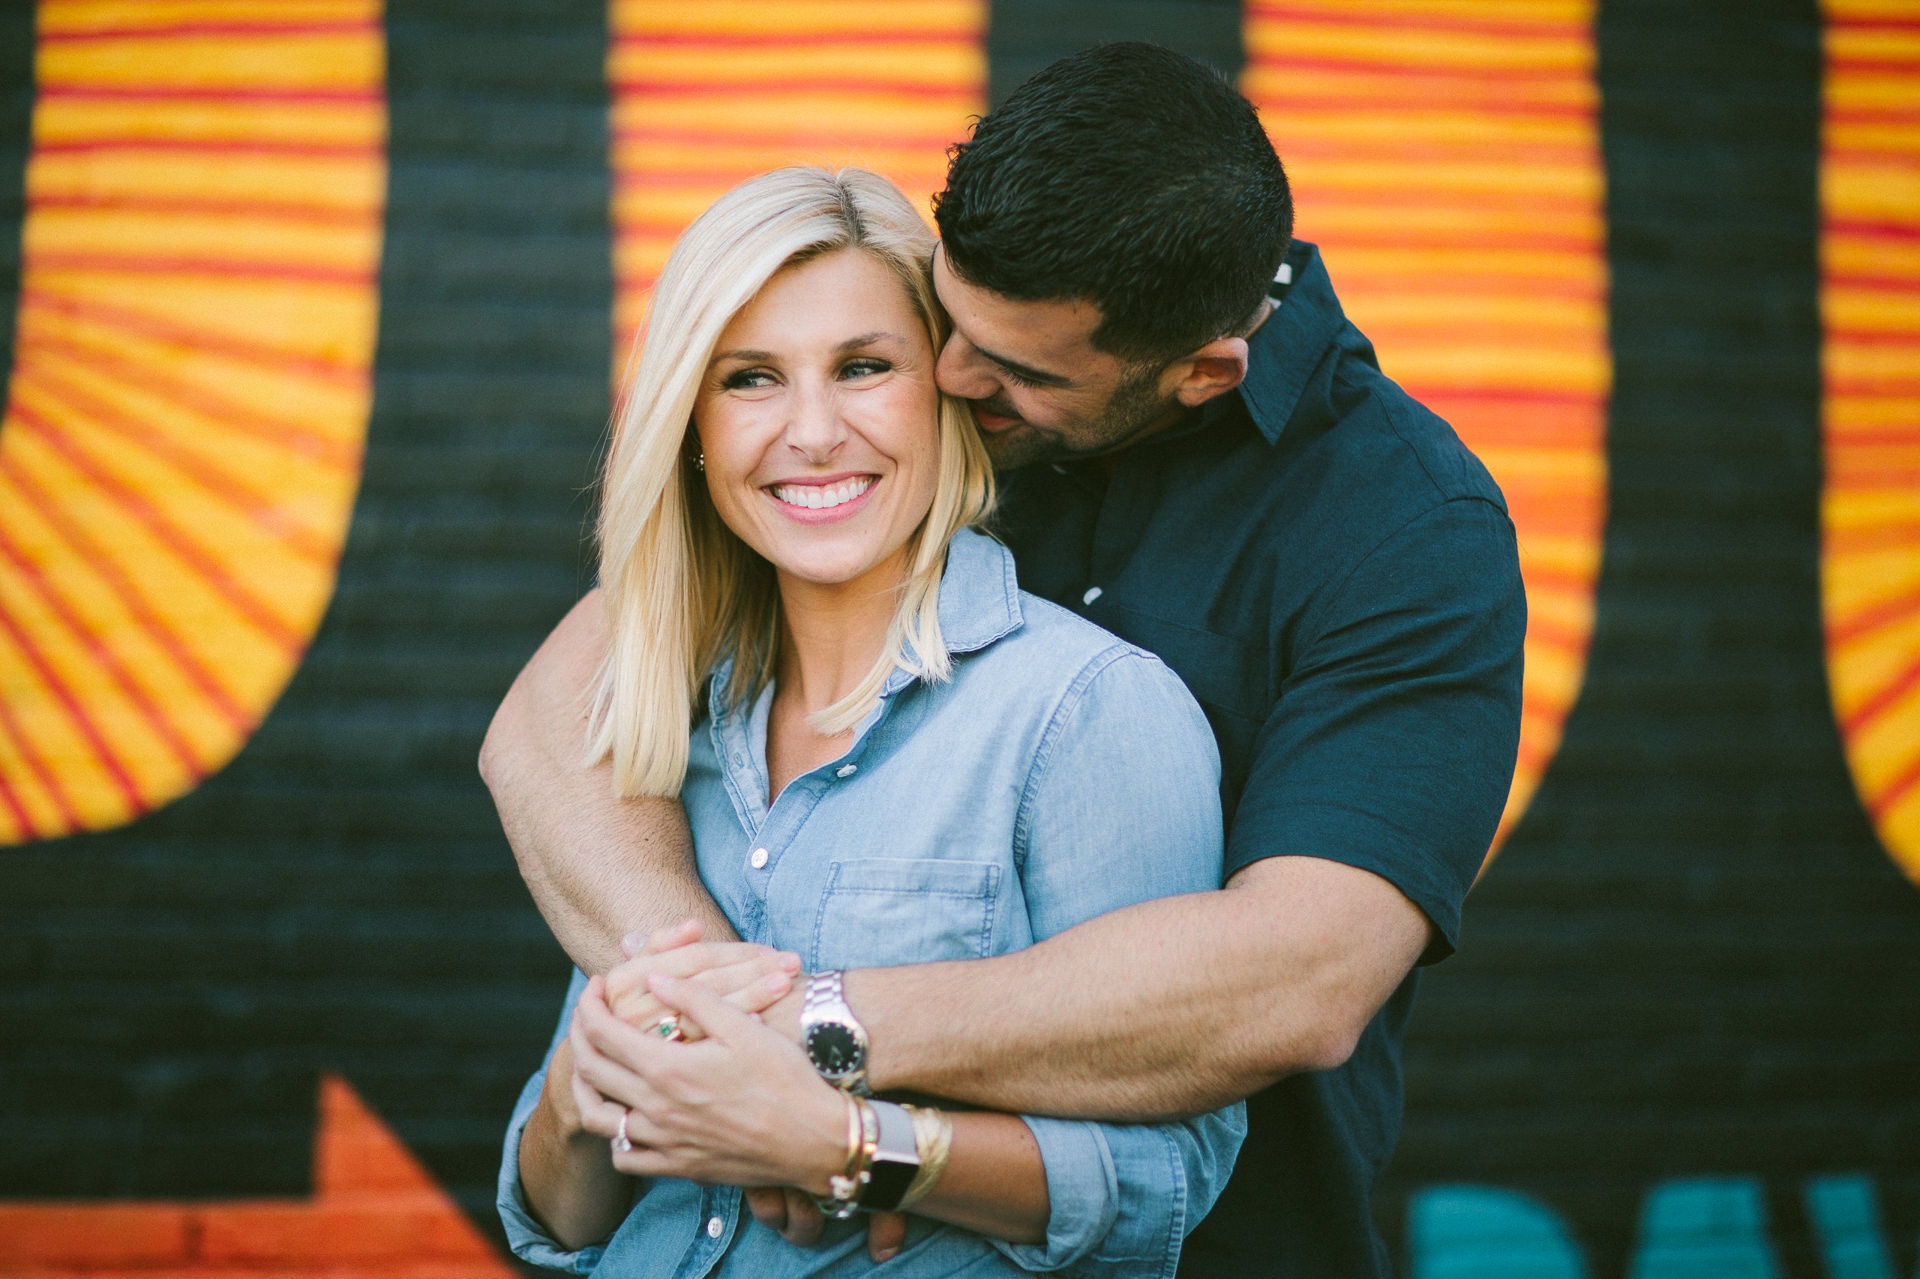 Sara Shookman Angelo DiFranco Engagement photos in cleveland by too much awesomeness photography 16.jpg